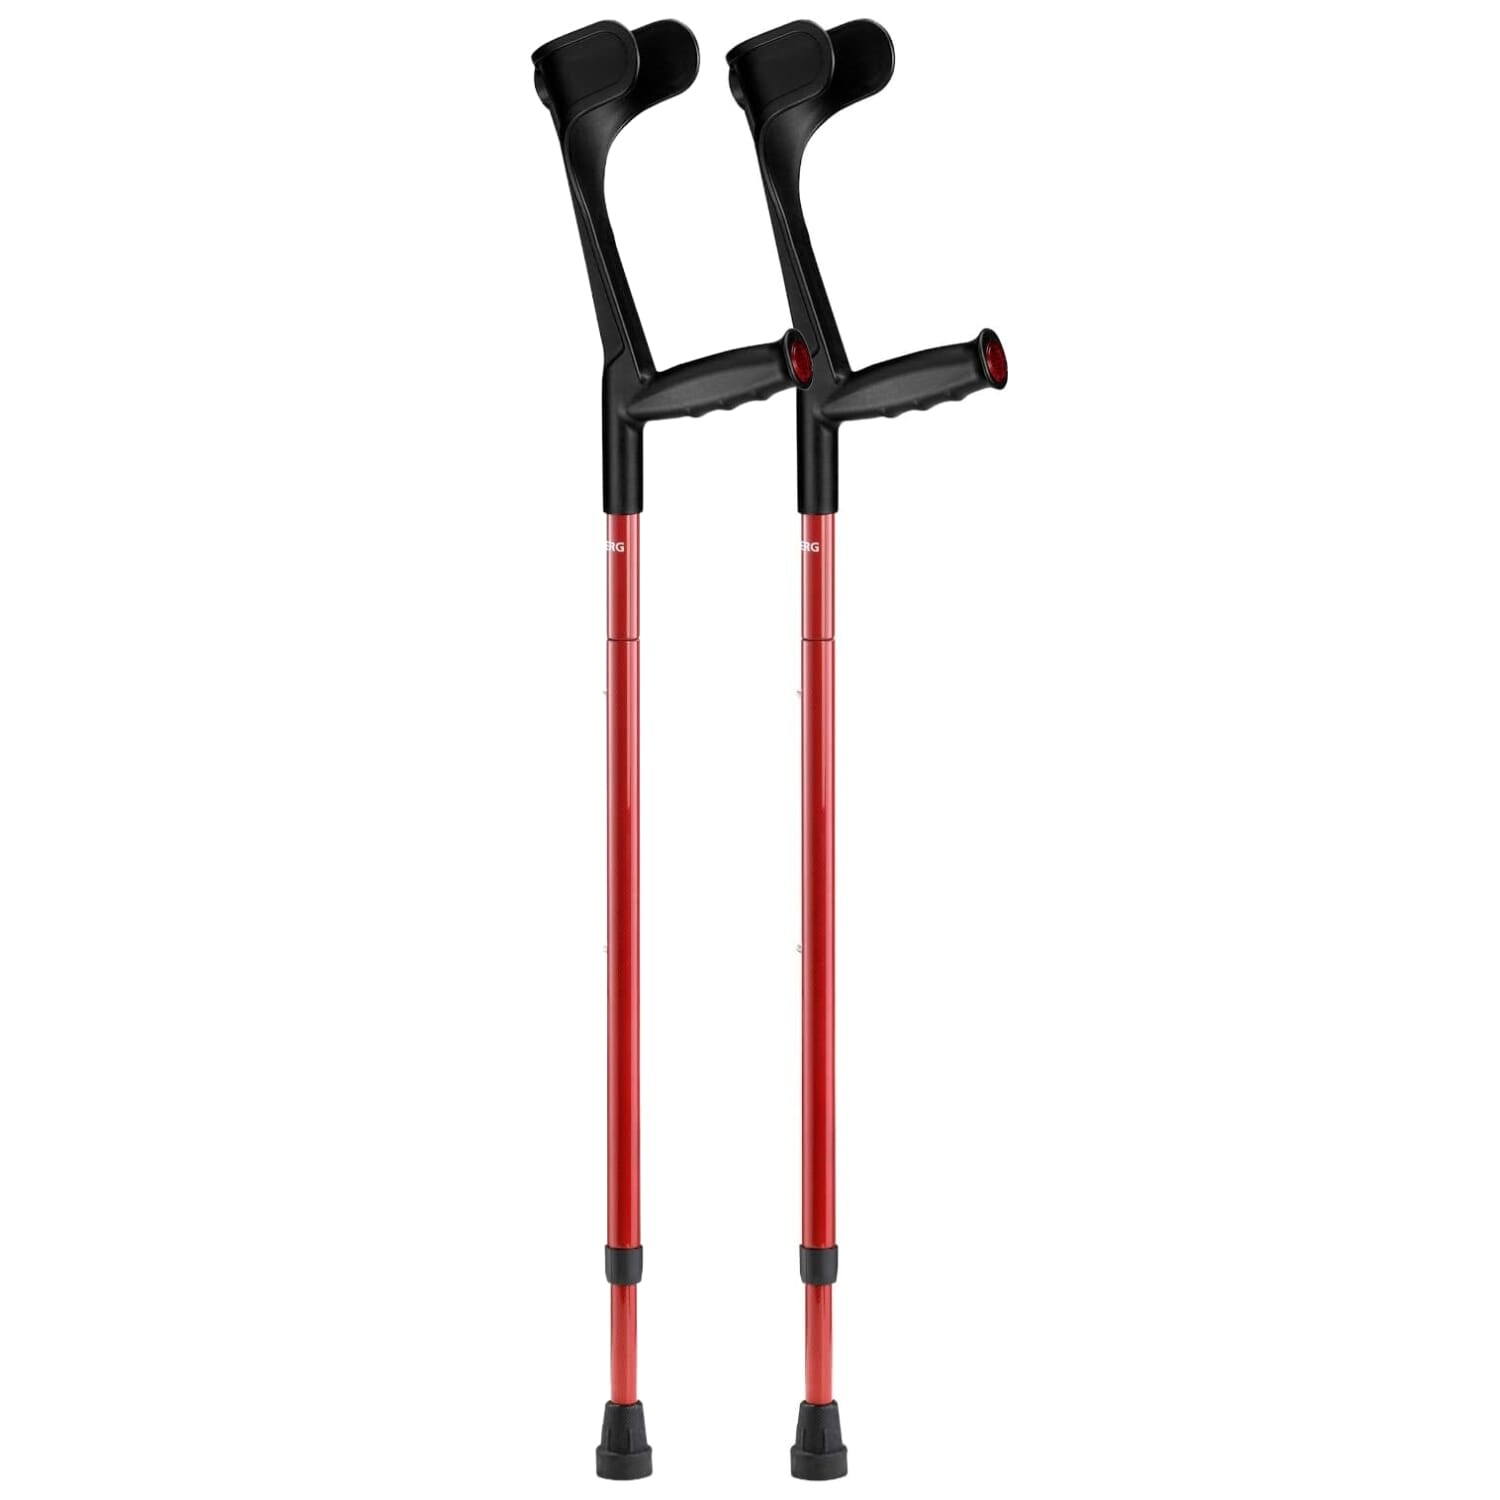 View Ossenberg Carbon Fibre Folding Crutches Red Pair information